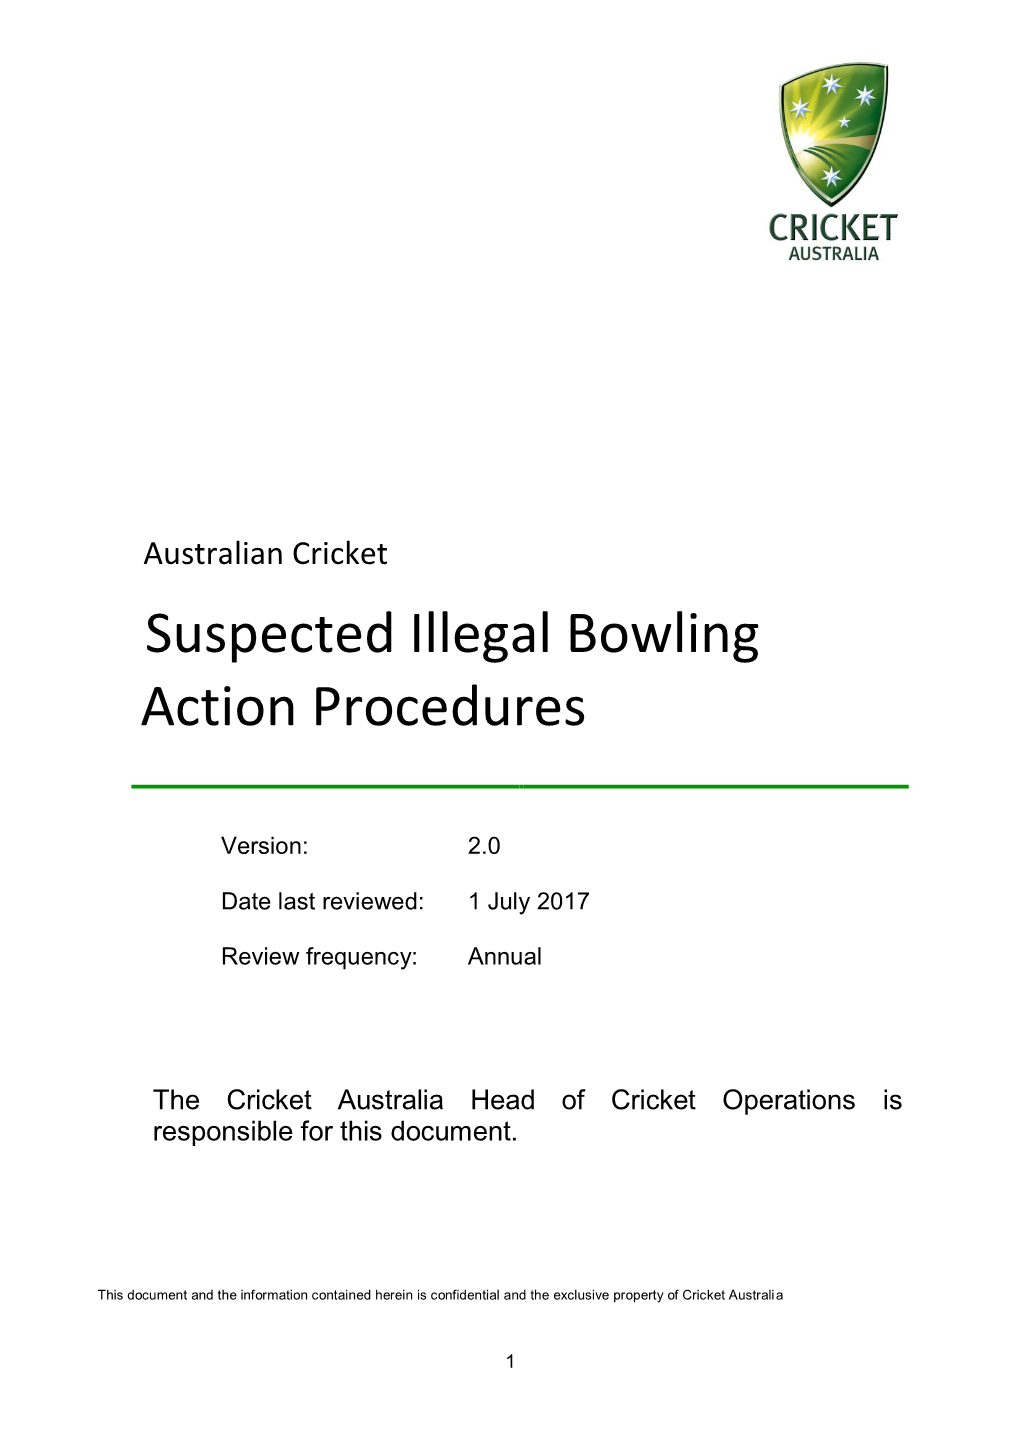 Suspected Illegal Bowling Action Procedures